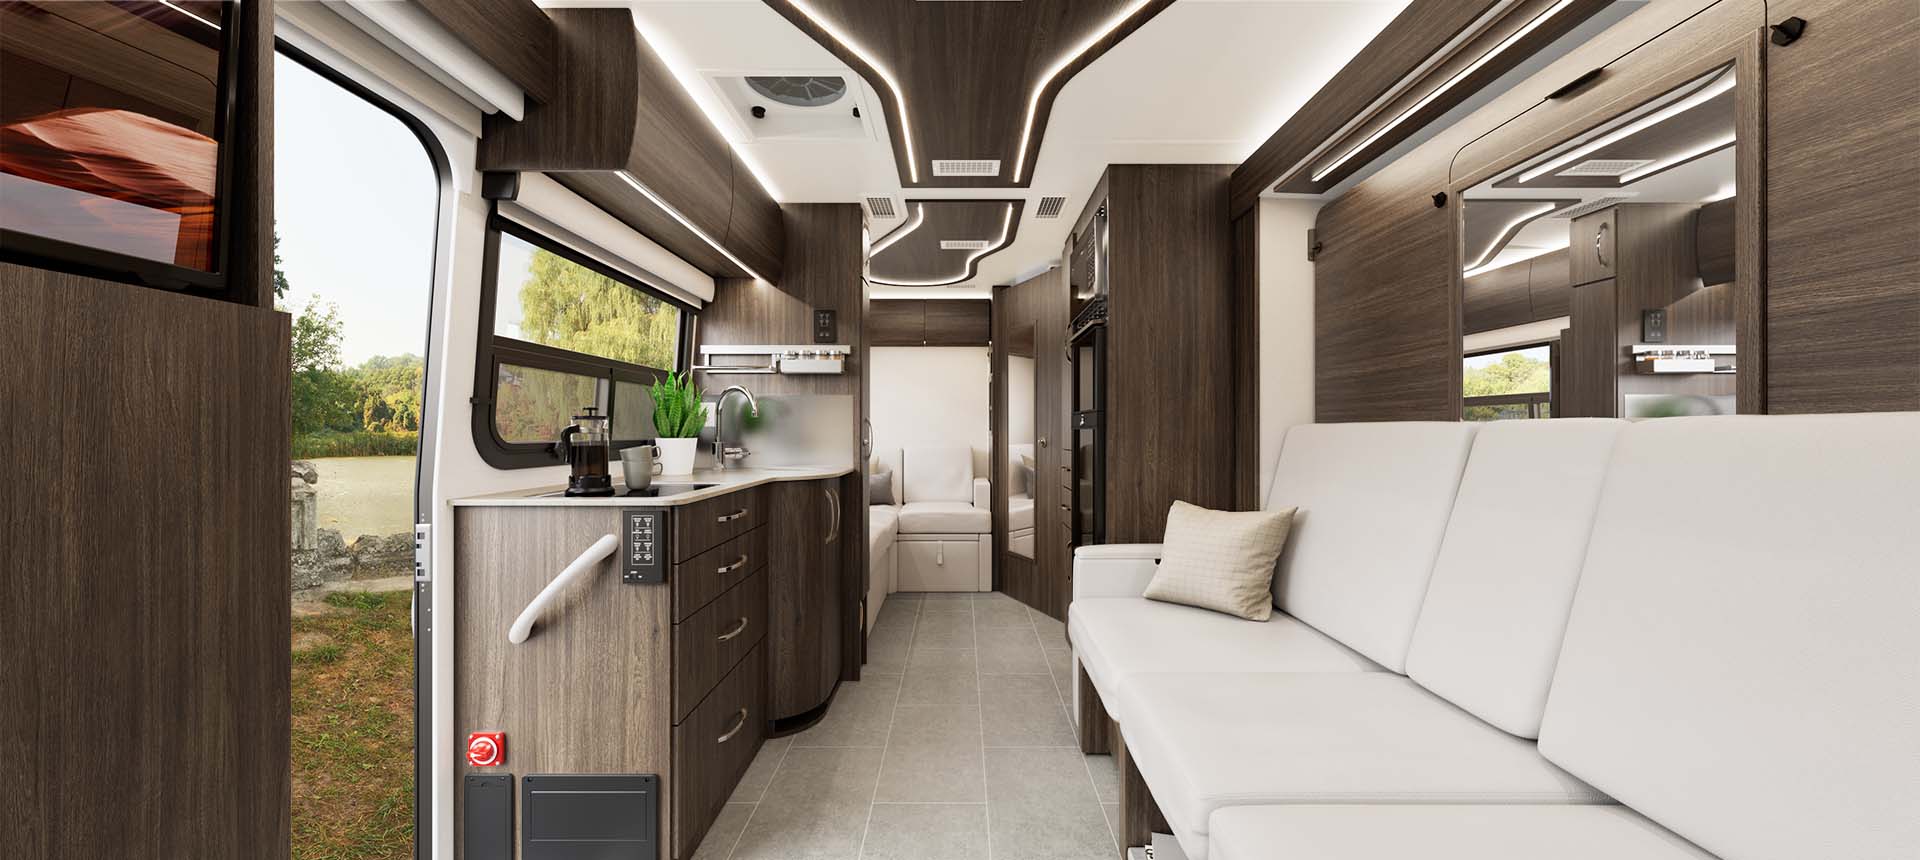 2023 Unity FX shown in Mocha Cabinetry